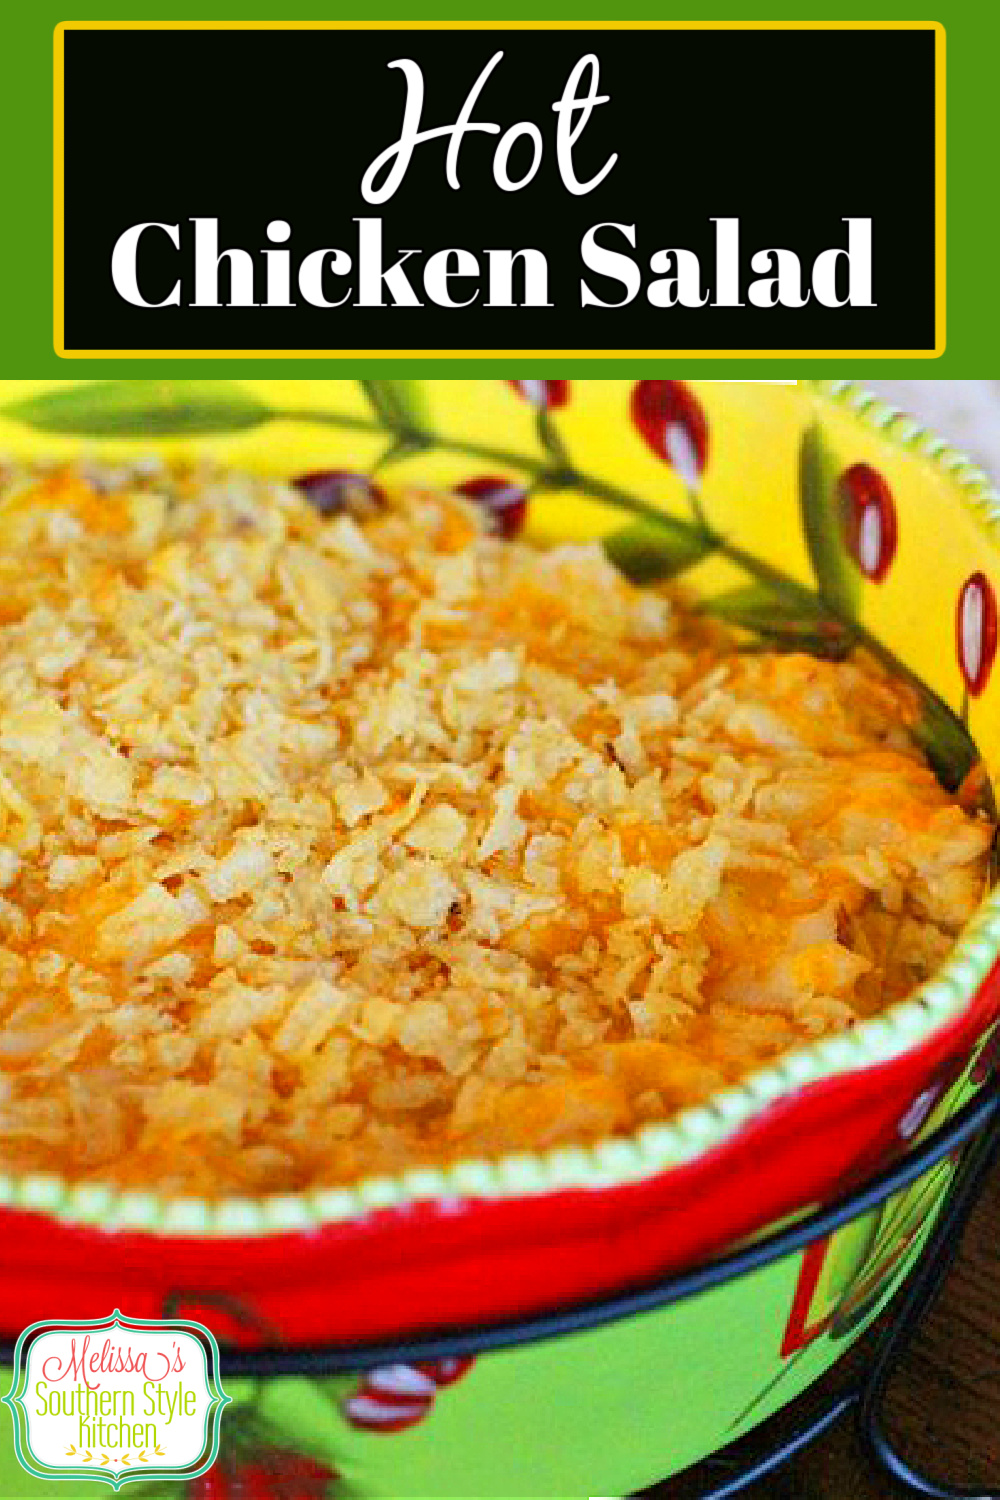 Slather this Hot Chicken Salad on crostini, crackers or chips for light meals and snacking #chickensalad #hotchickensalad #easychickenrecipes #appetizers #diprecipes #saladrecipes #holidayrecipes #gamedaysnacks #tailgating #chicken #southernfood #southernrecipes